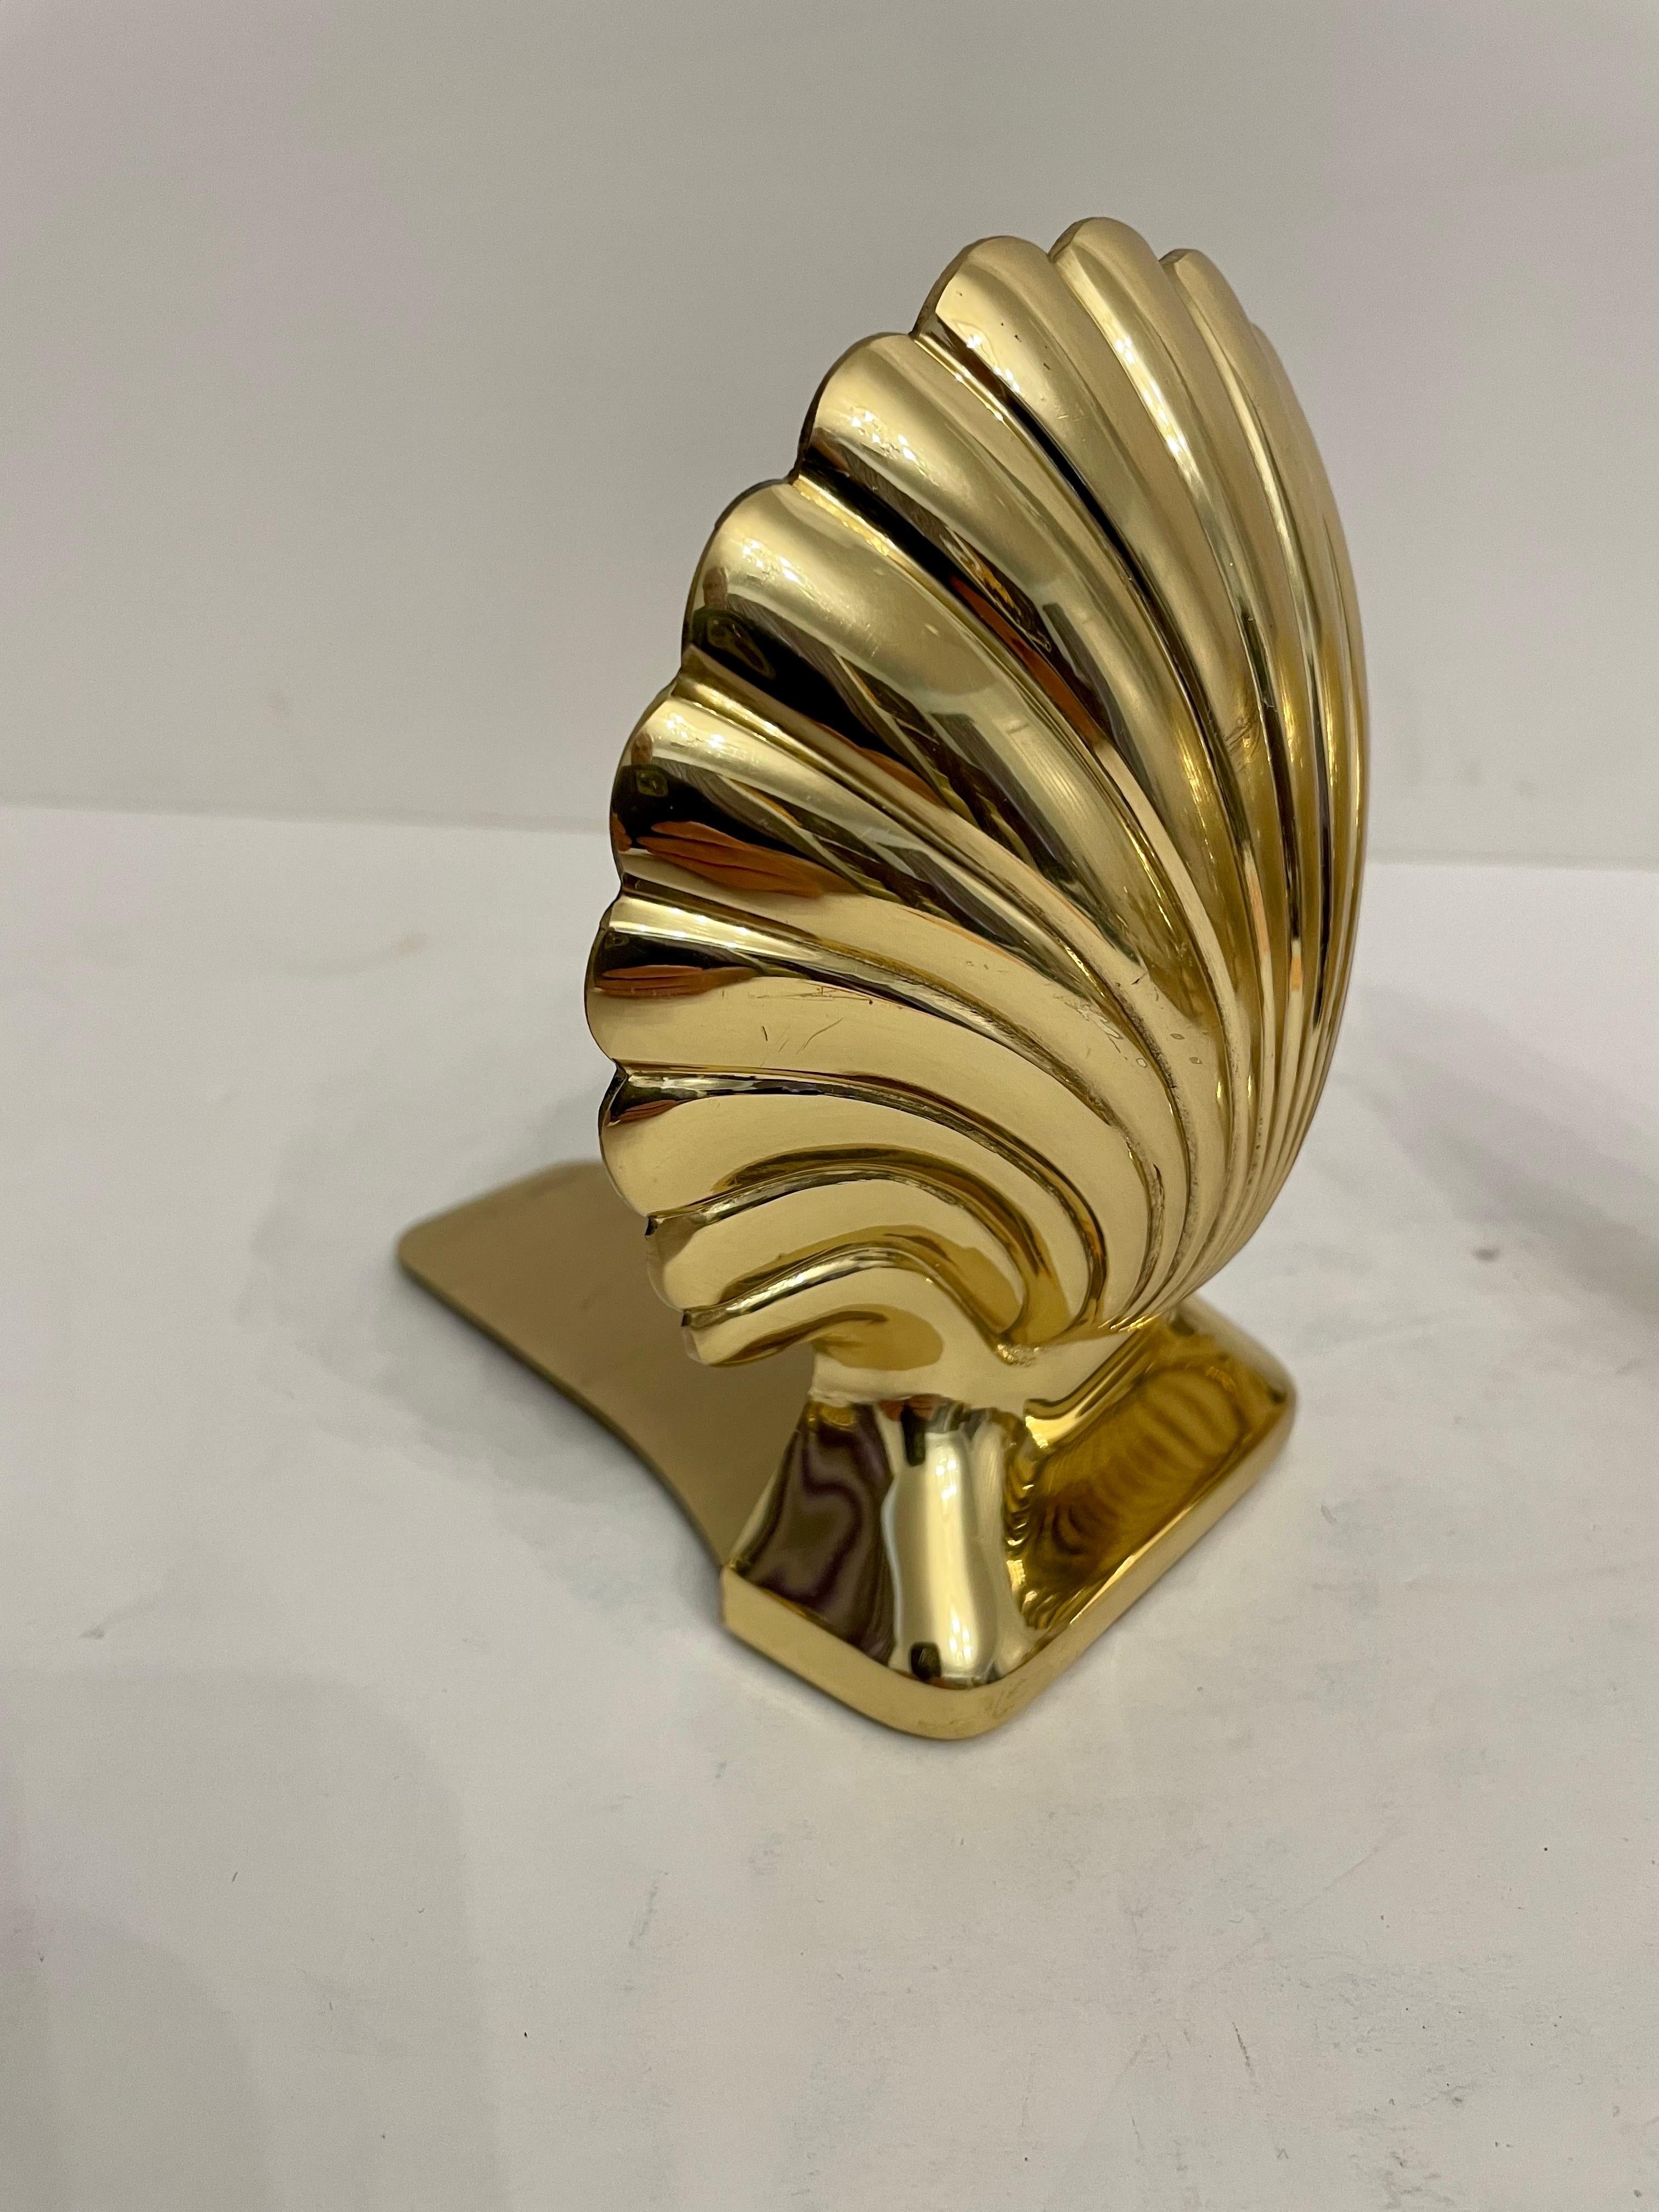 Pair brass clam shell seashell bookends made by Baldwin Brass Company from the Henry Ford & Greenfield Village Collection. 
Each Bookend stands 6” high and 5” wide including the tongue of the base that slips under books to hold them in place, each